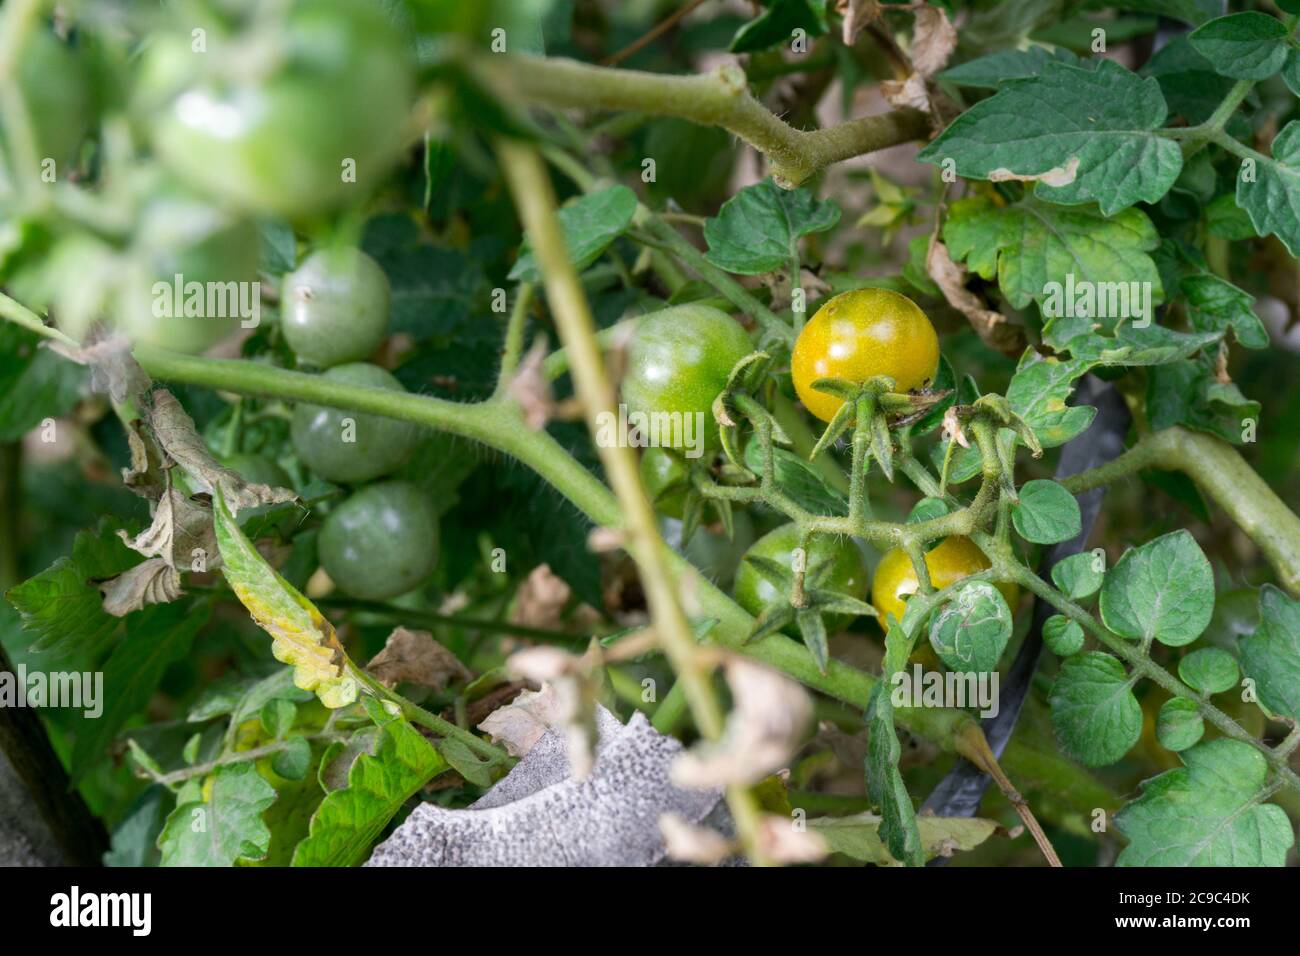 A closeup shot of cherry tomatoes. Cherry tomato is a type of small round tomato believed to be an intermediate genetic admixture between wild currant Stock Photo